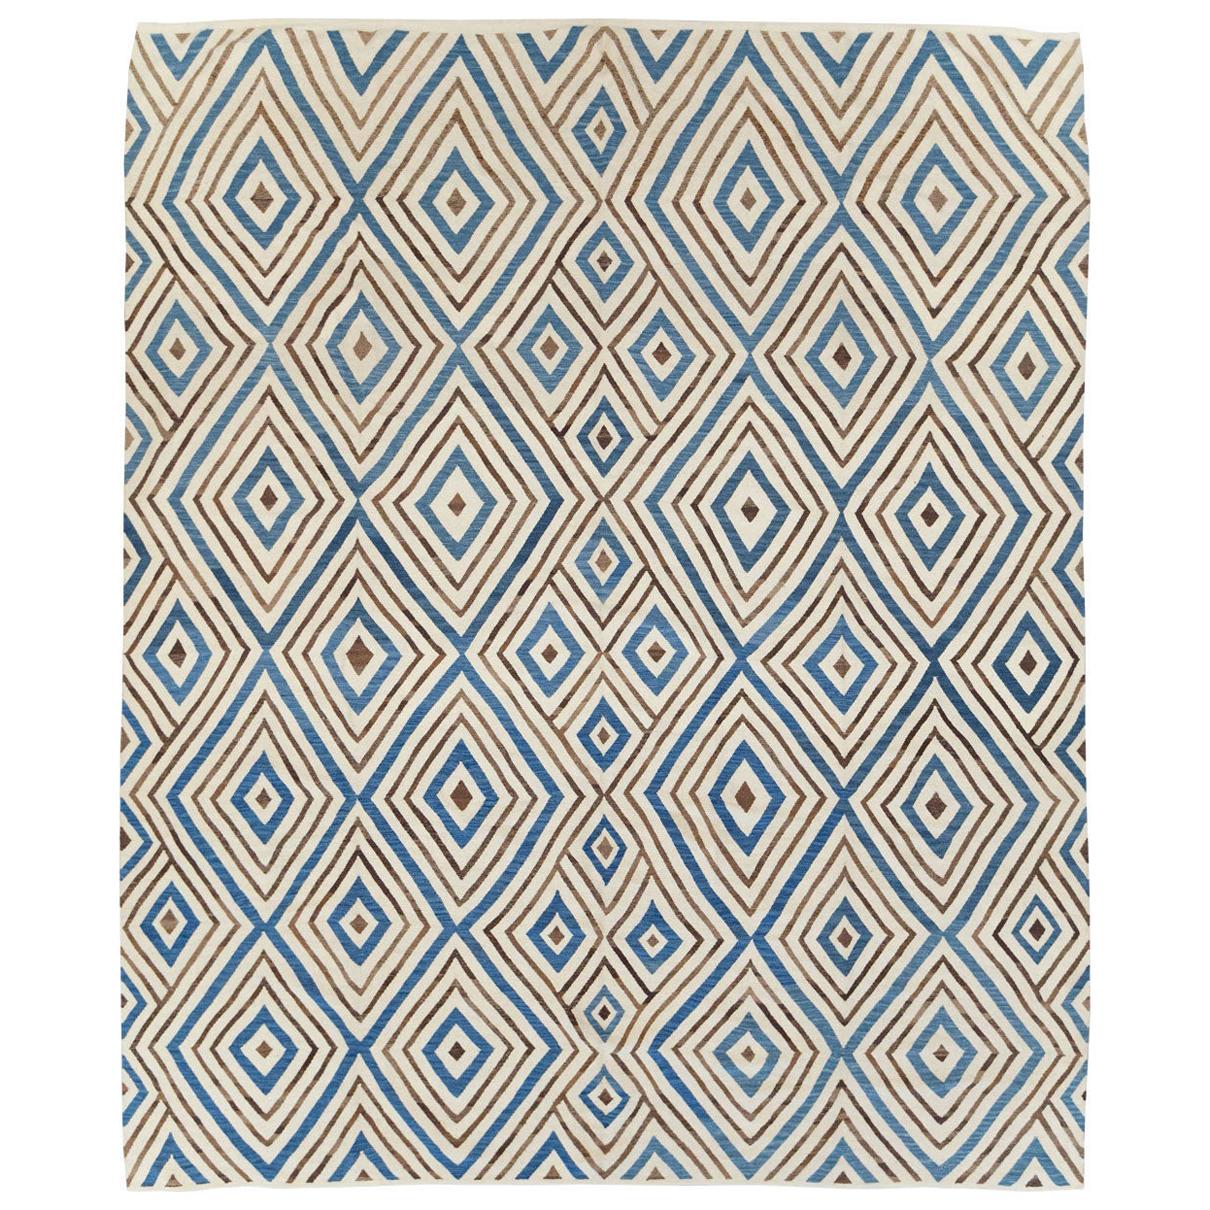 Contemporary Turkish Flatweave Kilim Large Room Size Carpet In Cream and Blue